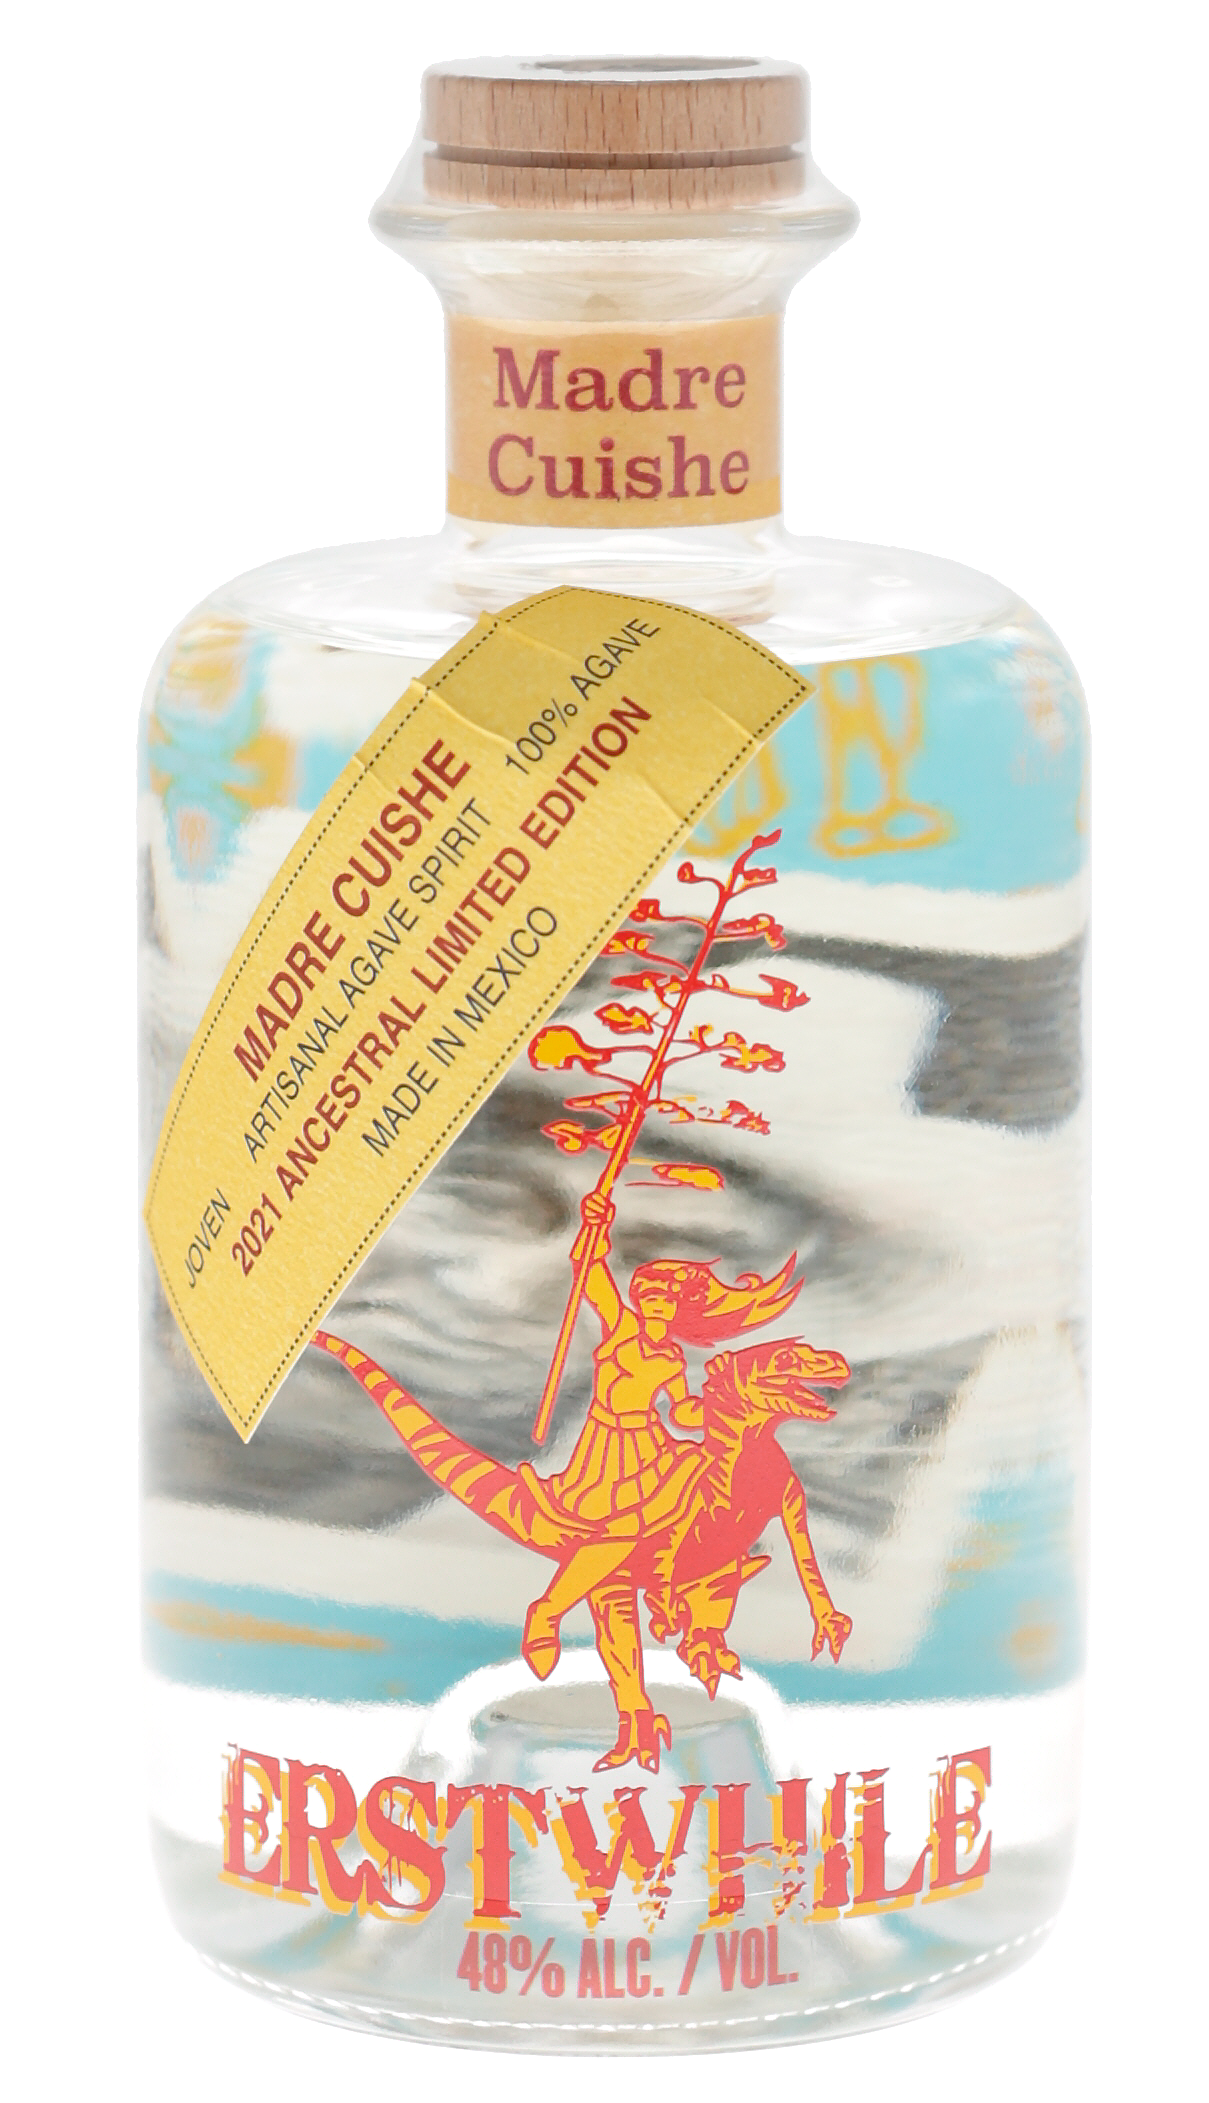 Erstwhile Madre Cuishe Mezcal (2021 Ancestral Limited Edition)